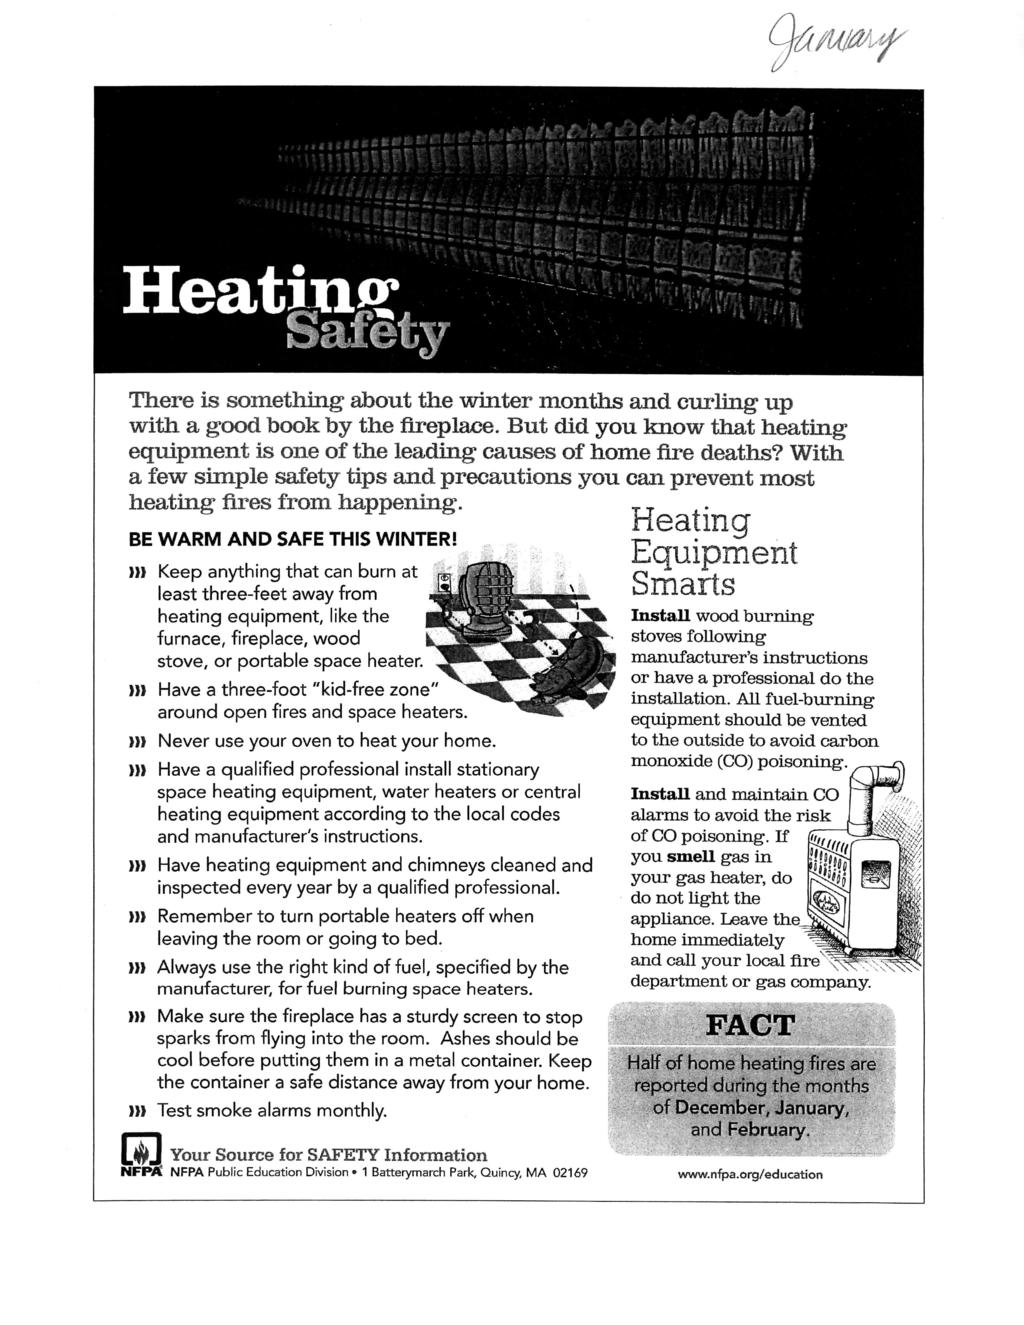 Heating, Safety There is something about the winter months and curling up with a good book by the fireplace. But did you know that heating equipment is one of the leading causes of home fire deaths?